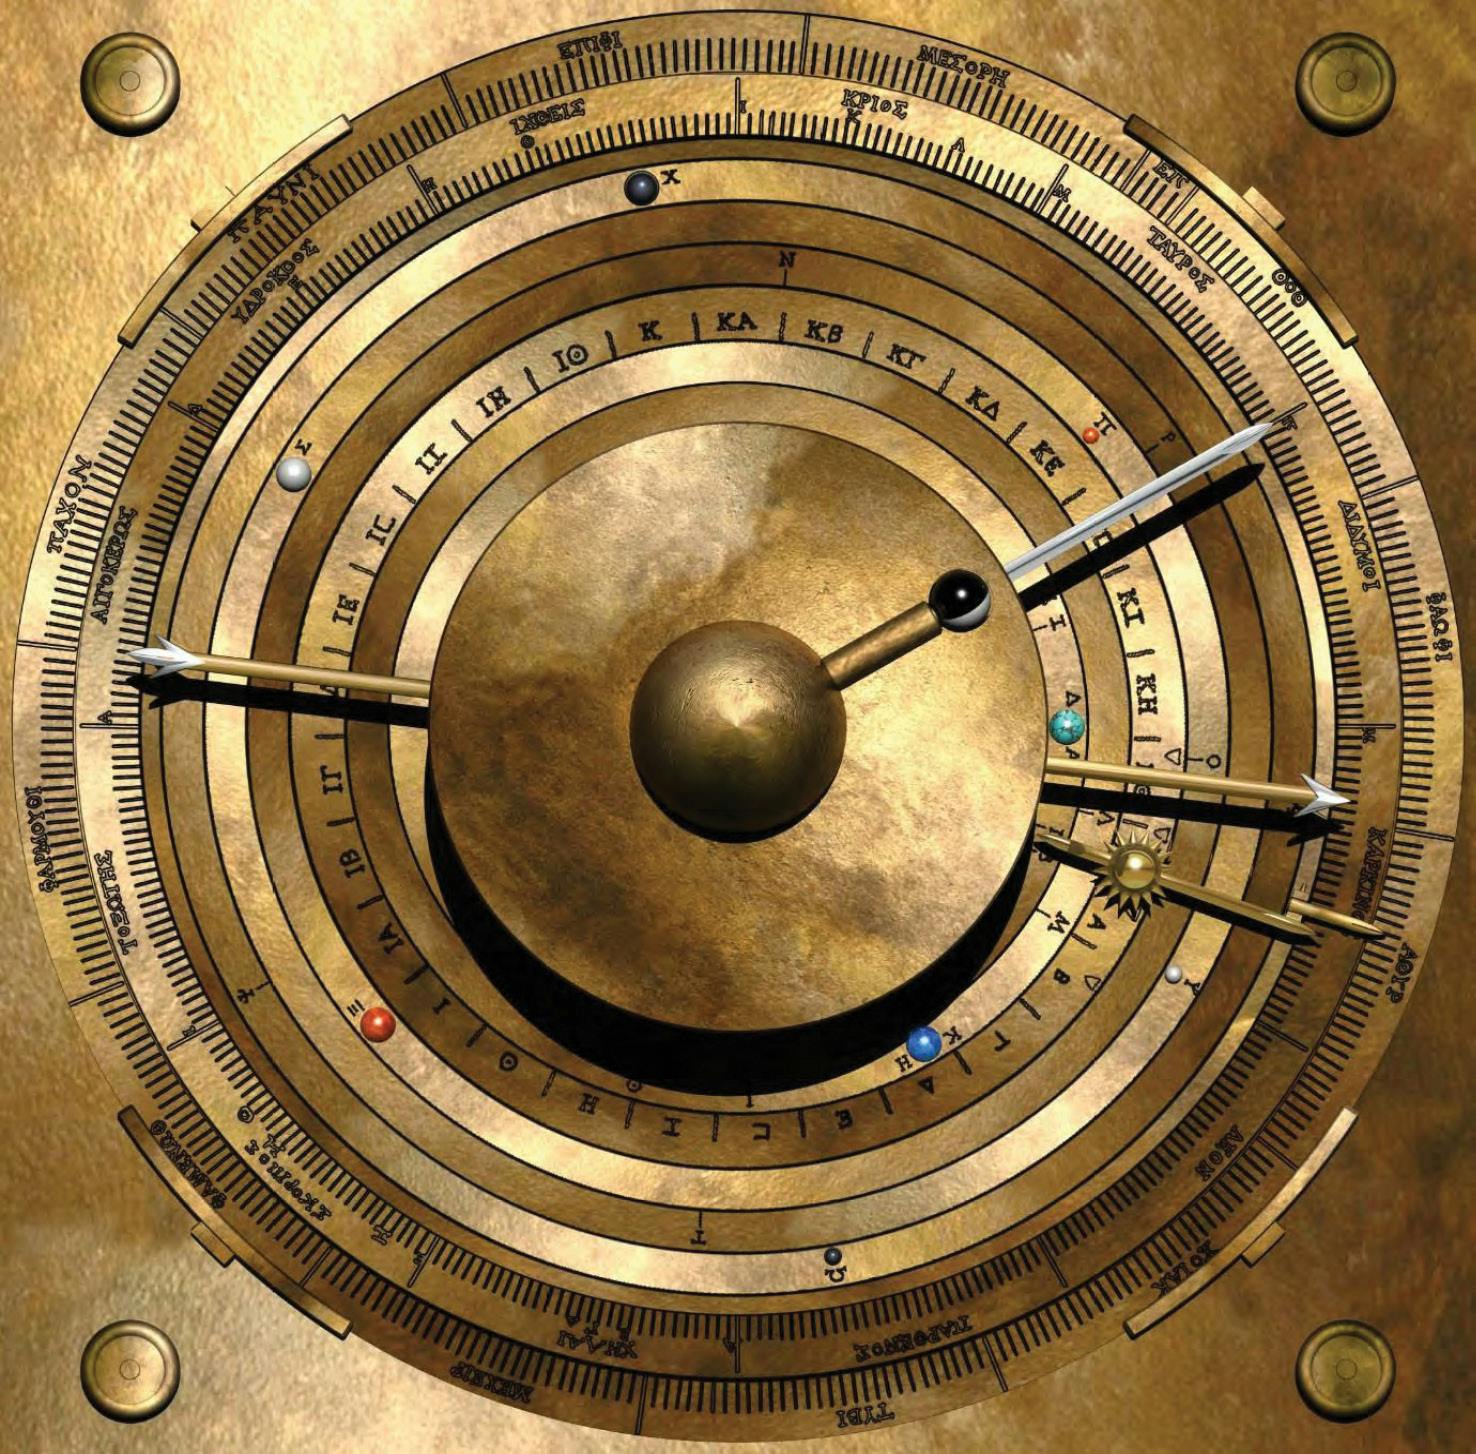 The Antikythera mechanism is an Ancient Greek hand-powered orrery, described as the oldest example of an analogue computer used to predict astronomical positions and eclipses decades in advance.